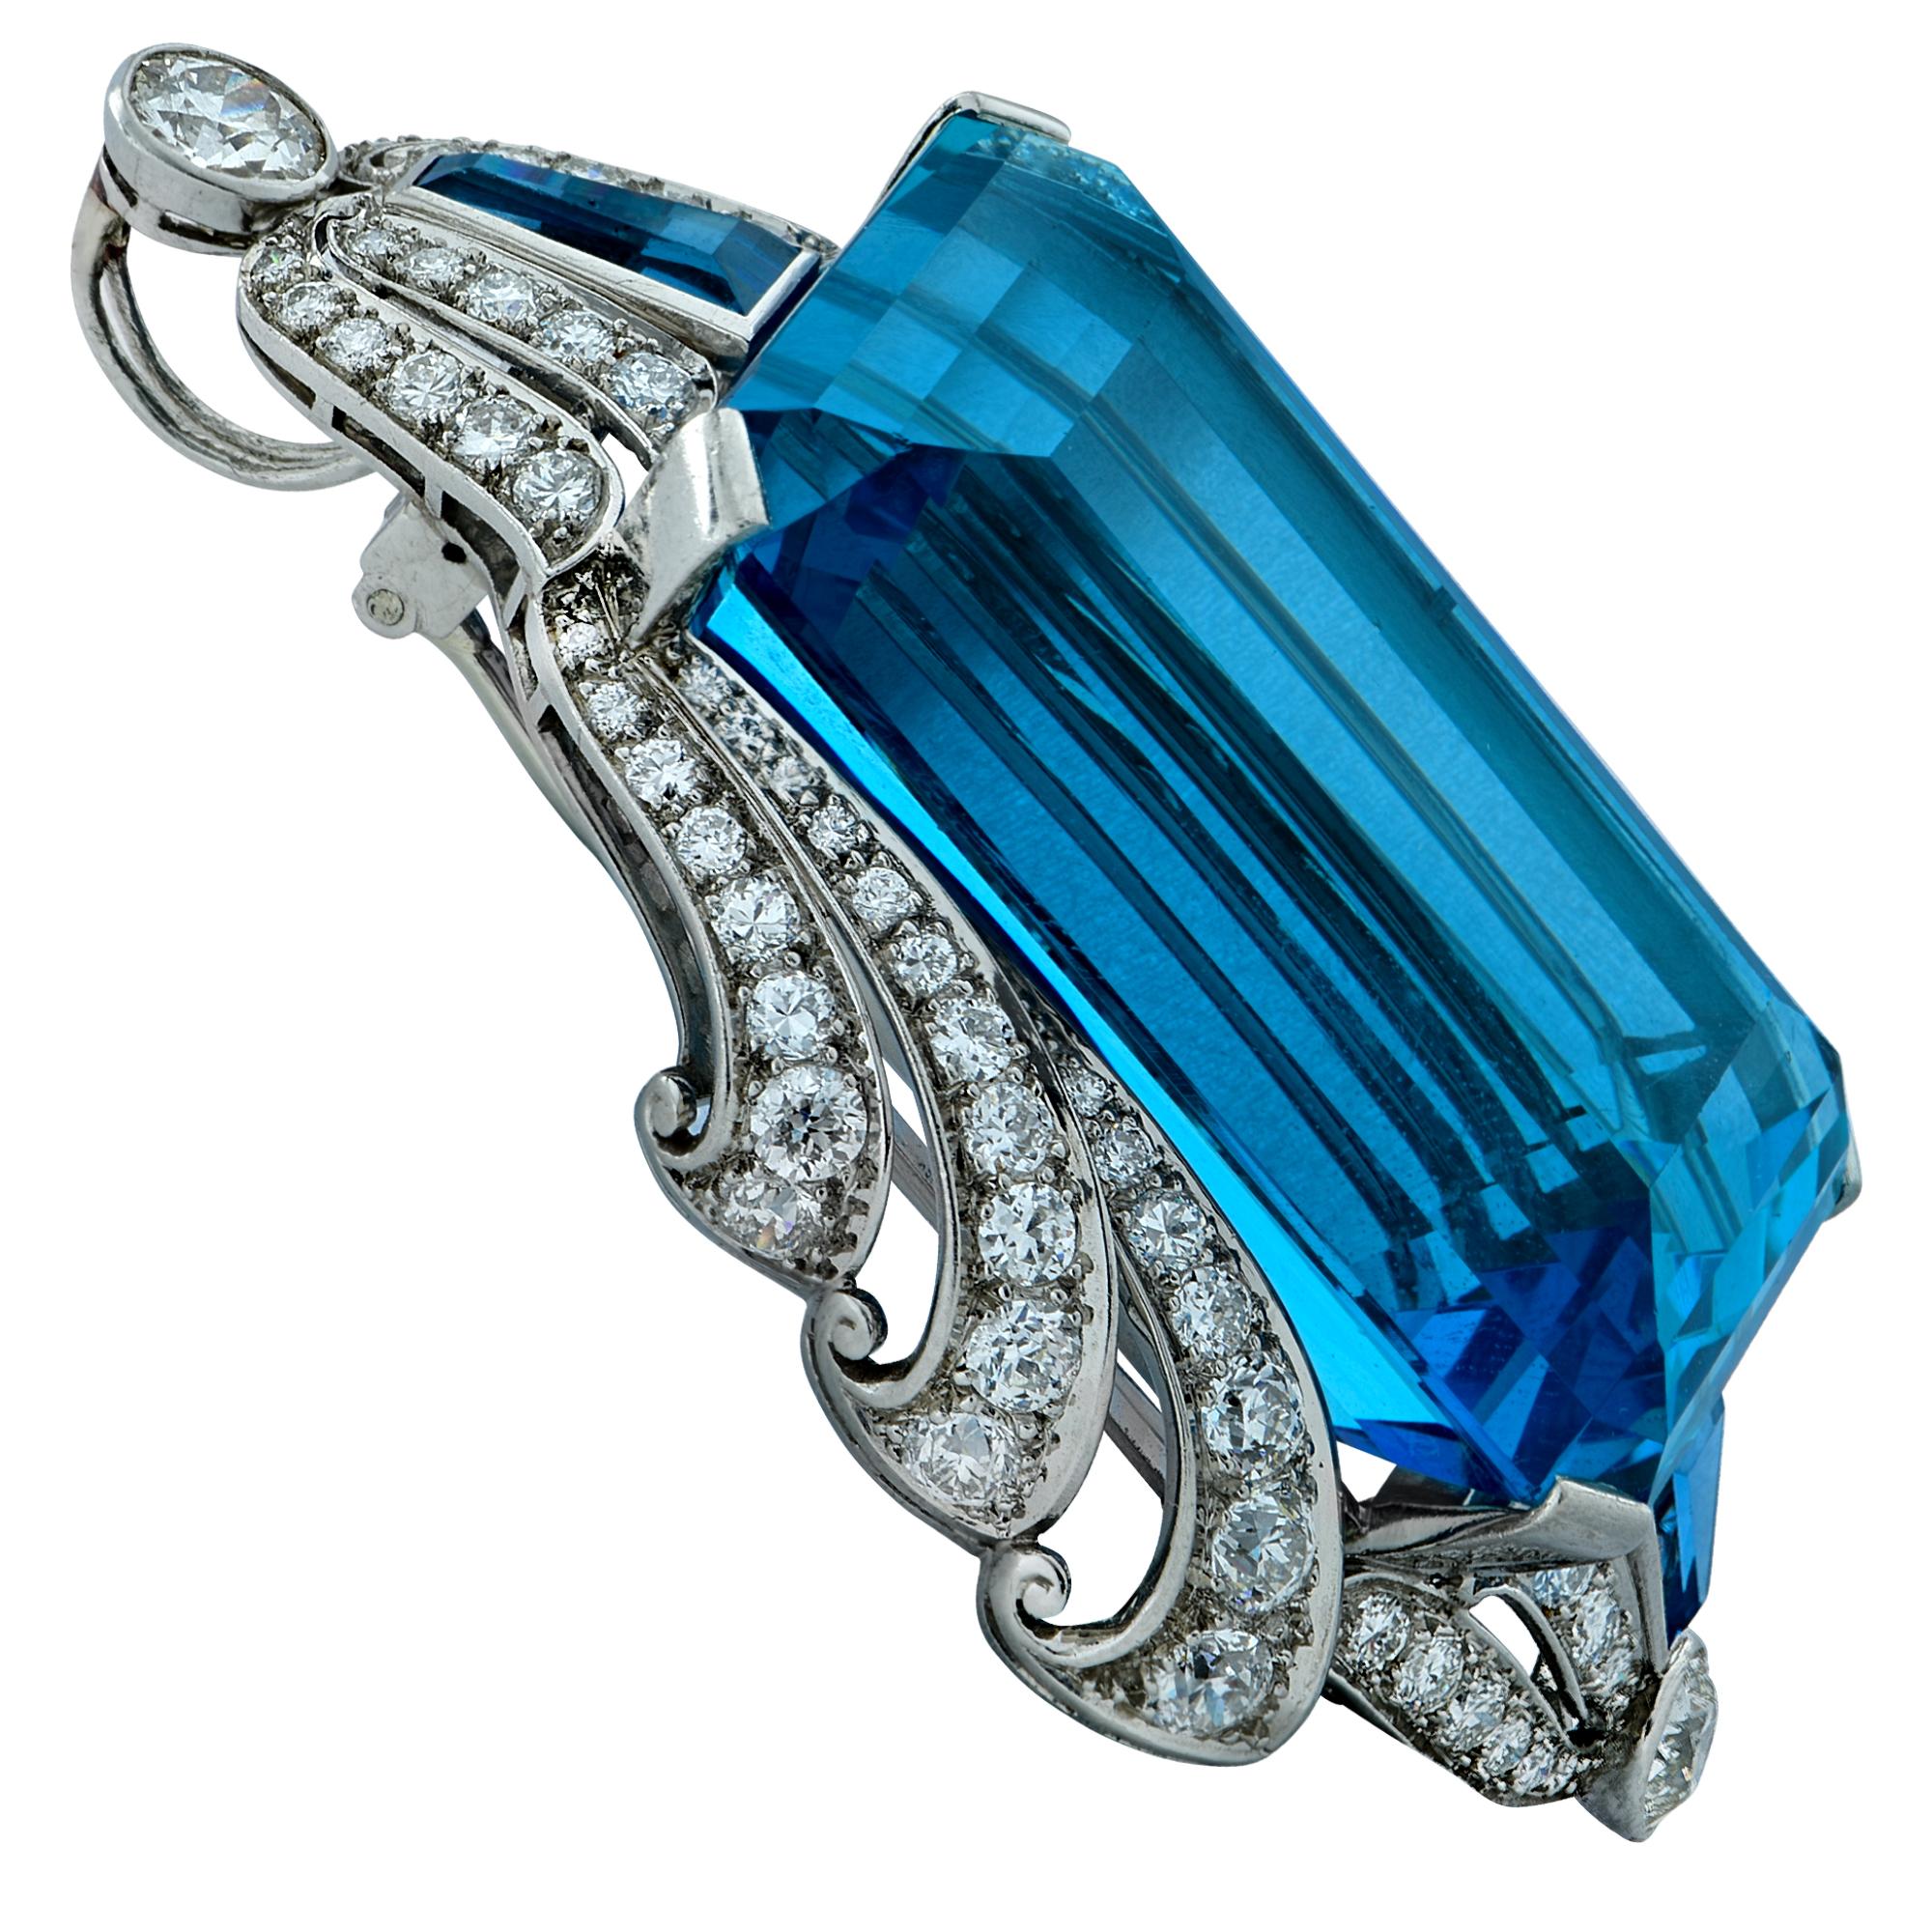 Sensational Art Deco brooch necklace crafted in platinum featuring an exceptional emerald cut Santa Maria intense blue, AGL certified Natural Aquamarine, weighing approximately 135 carats, accented by 86 European cut diamonds weighing approximately